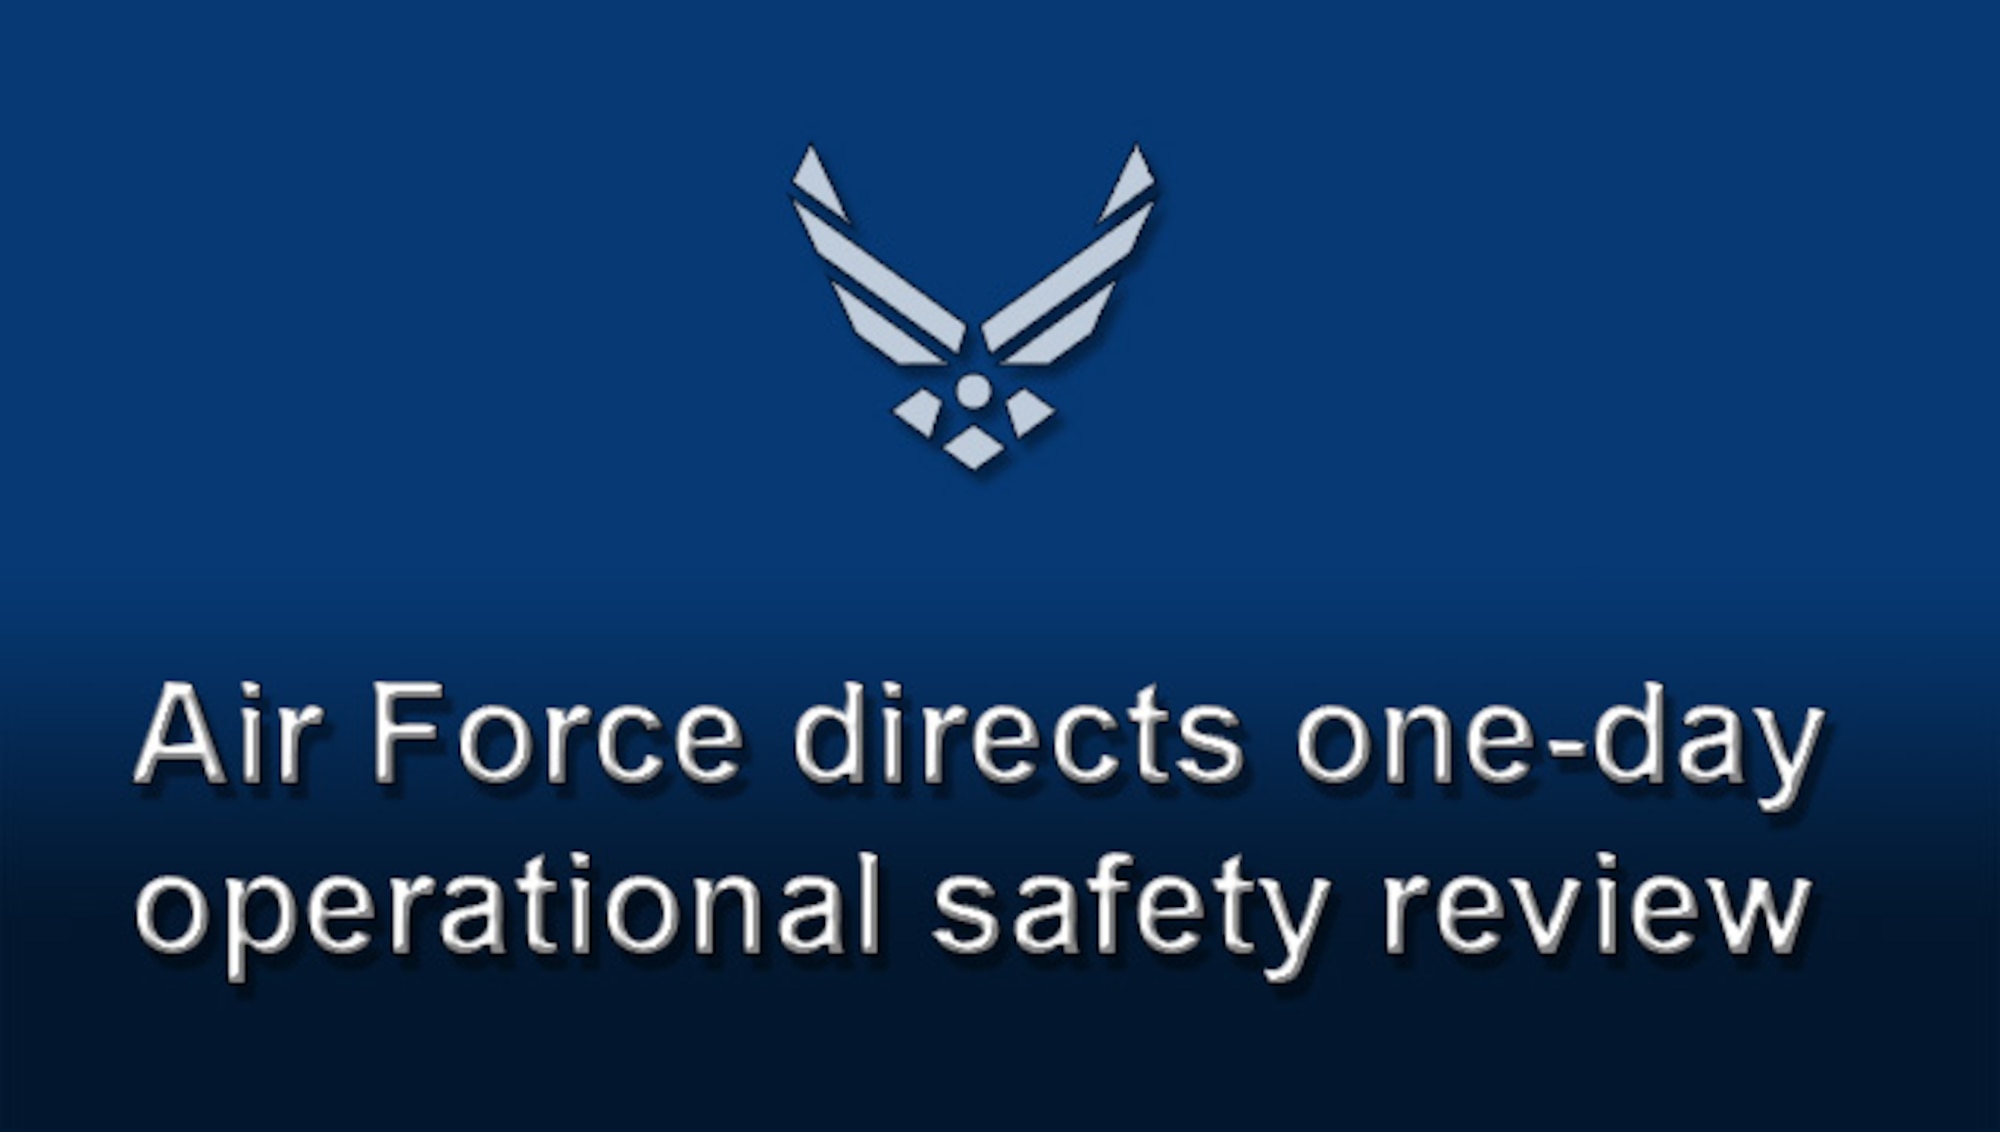 Chief of Staff of the Air Force Gen. David L. Goldfein directed all Air Force wings with flying and maintenance functions to execute a one-day operational safety review by May 21, 2018. (U.S. Air Force graphic)